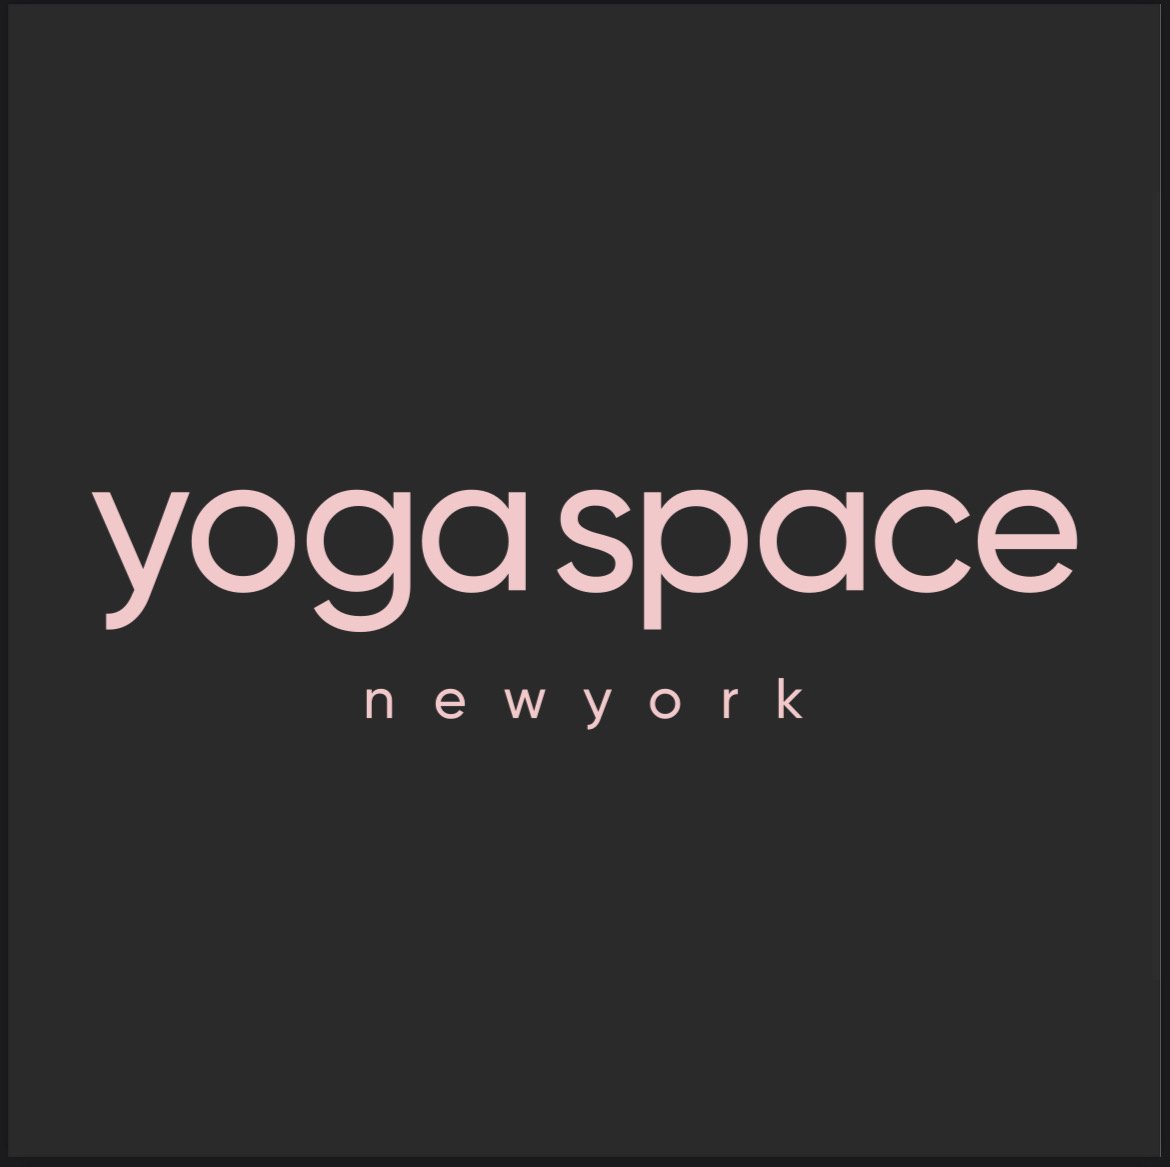 NYC SUMMER YOGA SERIES ☀️ Find your Ommm @City Point BKLYN with